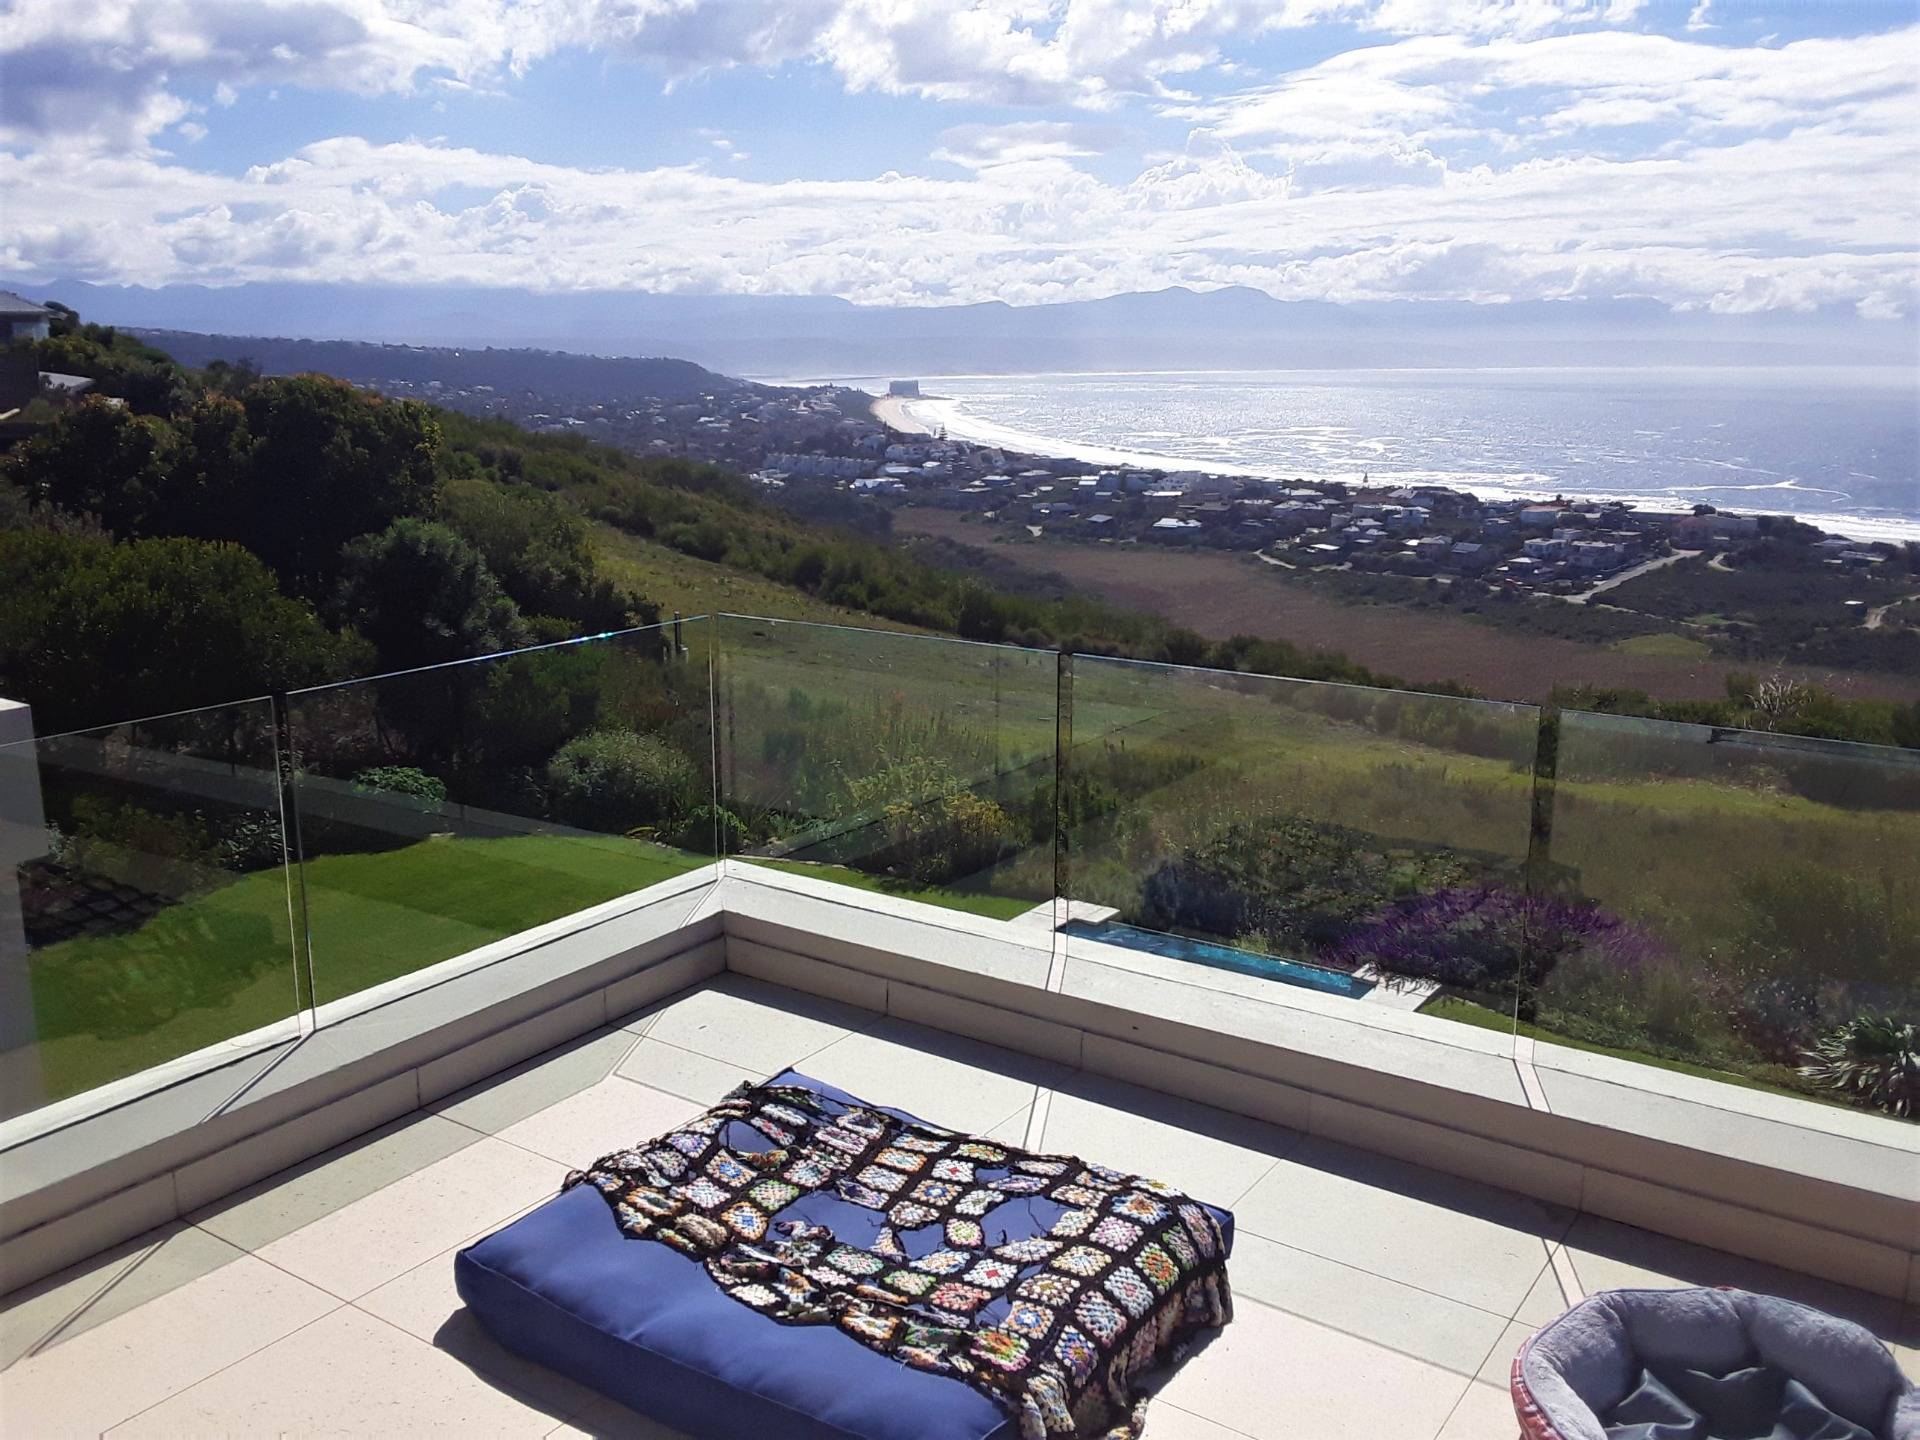 View of Robberg beach down below from one of the houses in the estate nearby